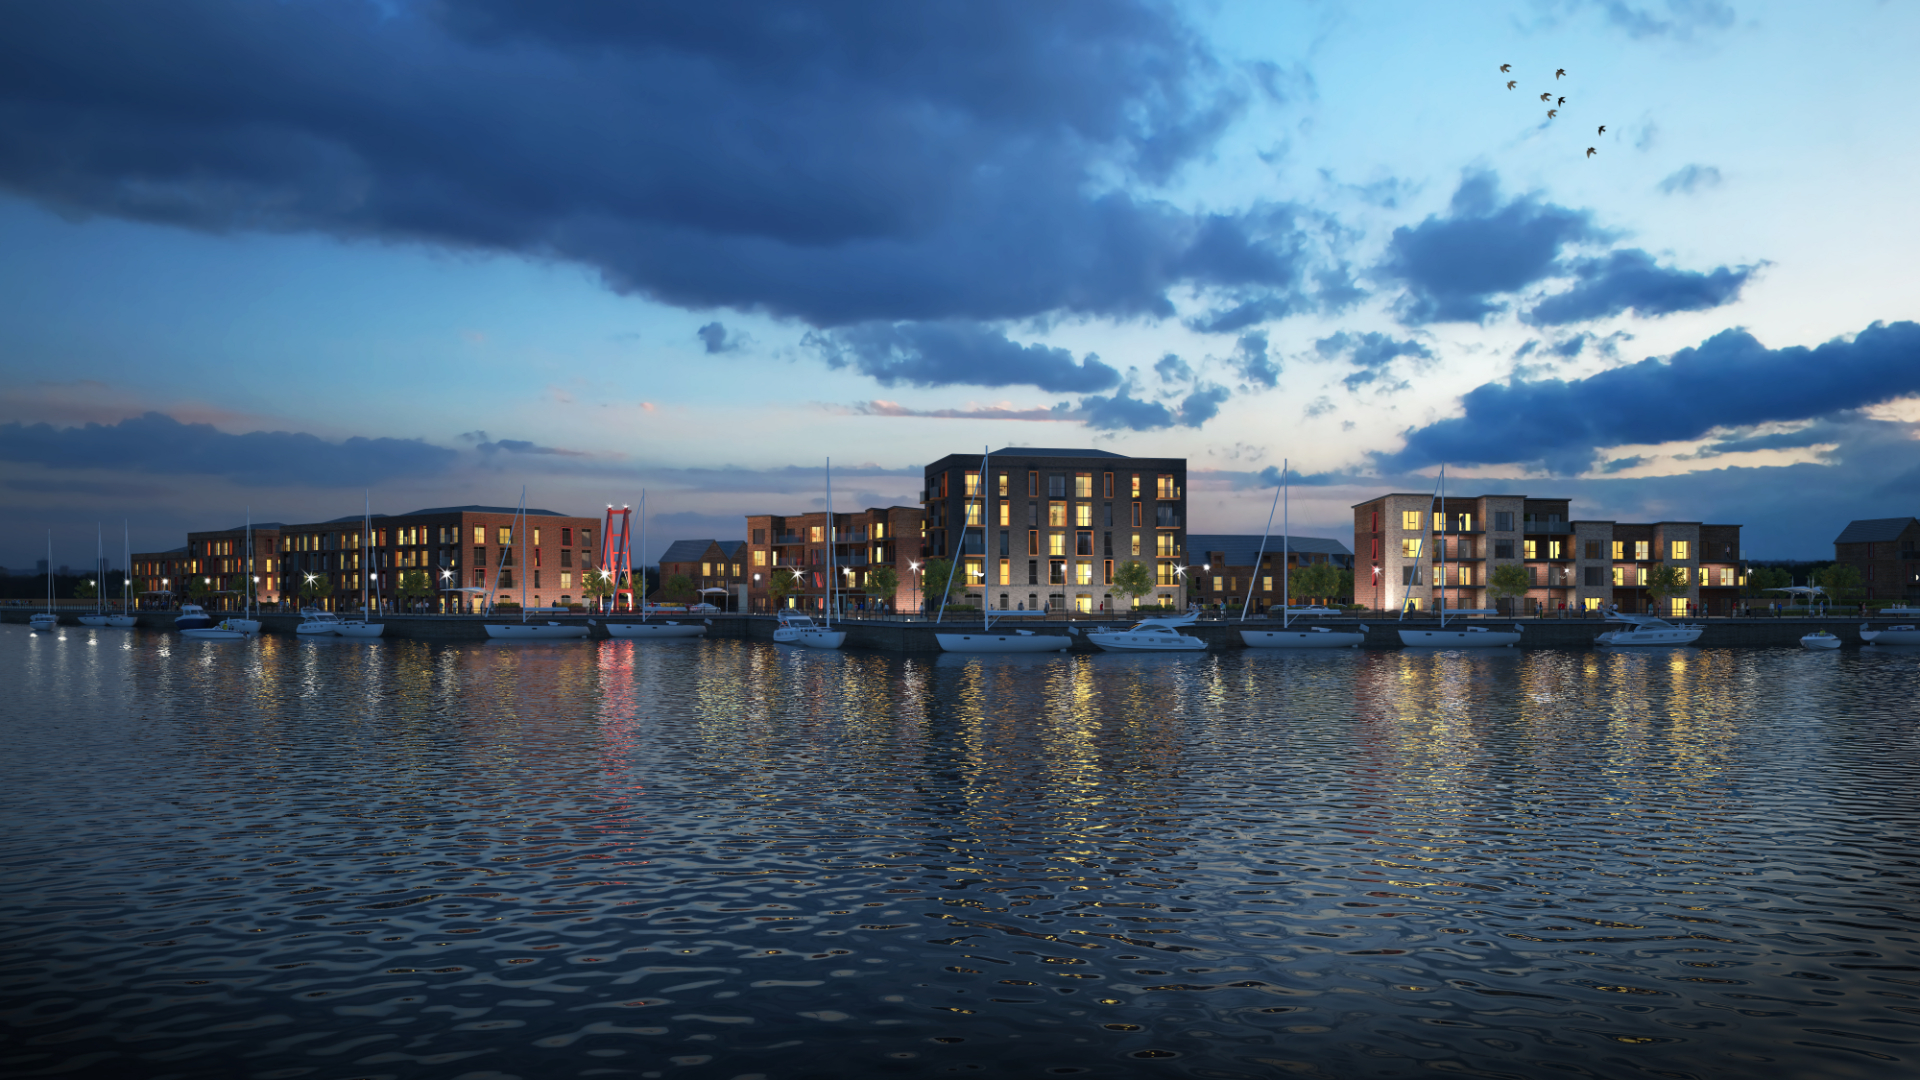 Buildings in south tyneside at dusk along a water front